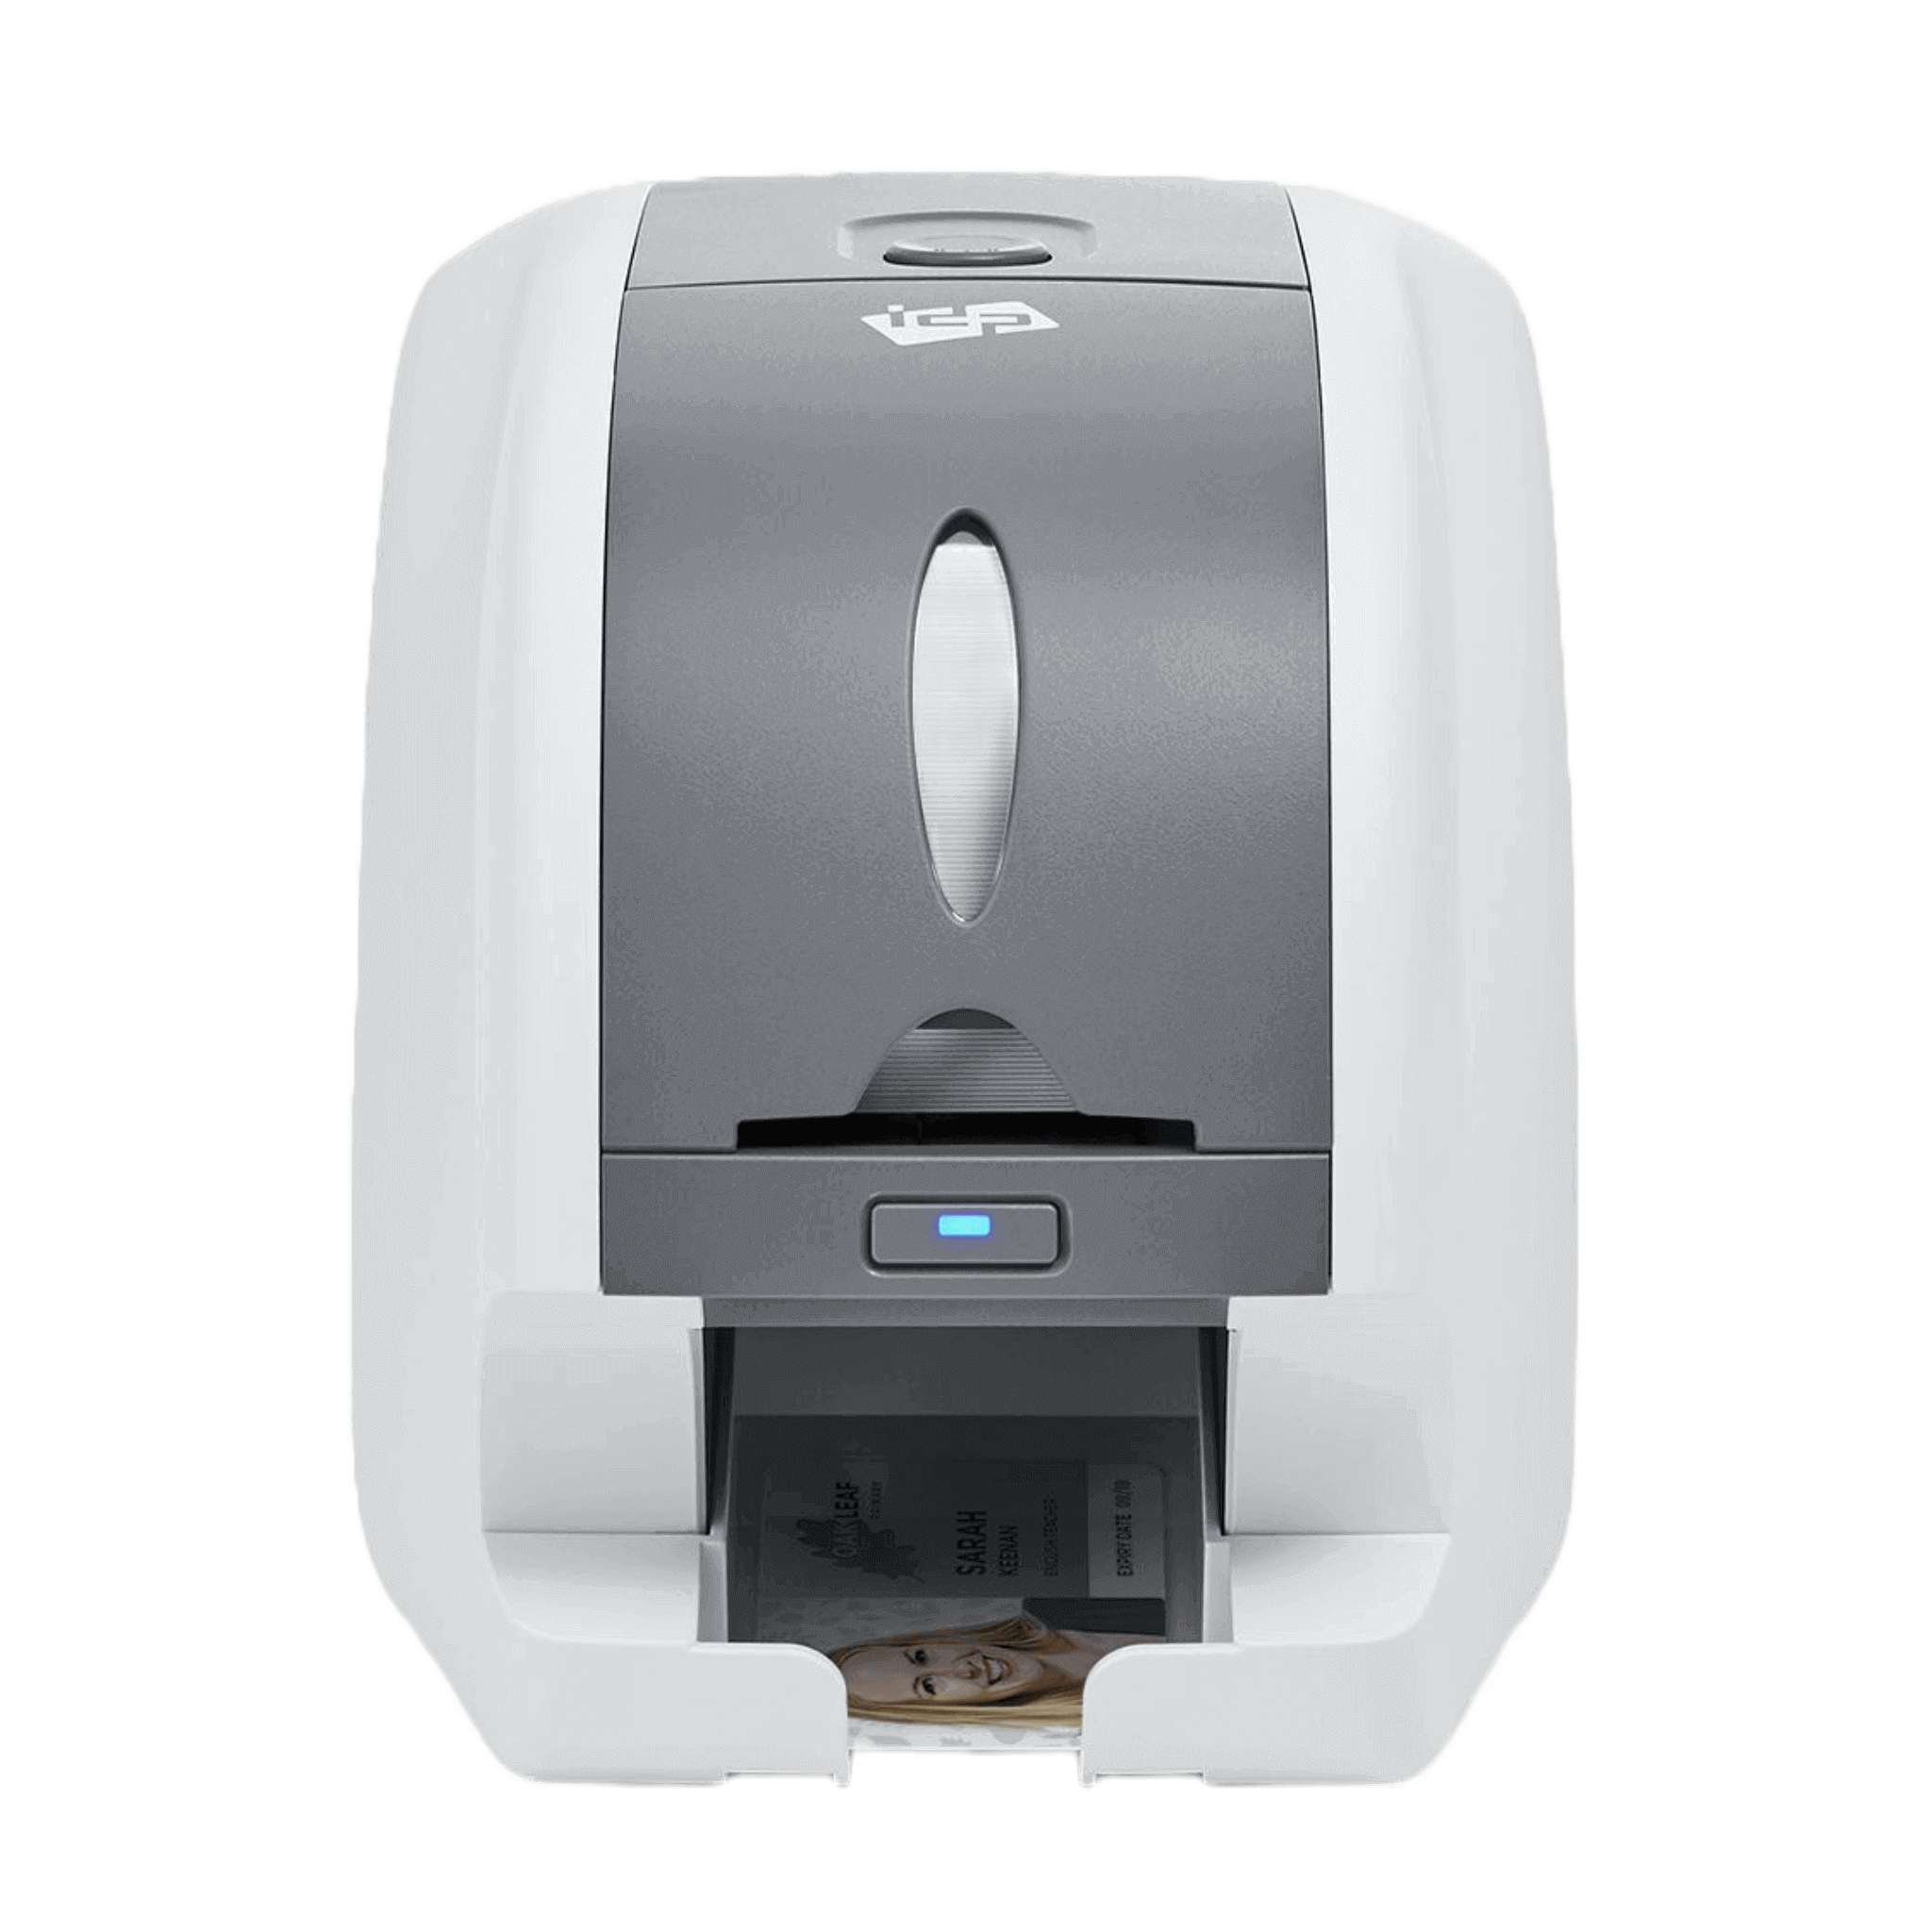 IDP Smart 31d ID Card Printer, Double Sided